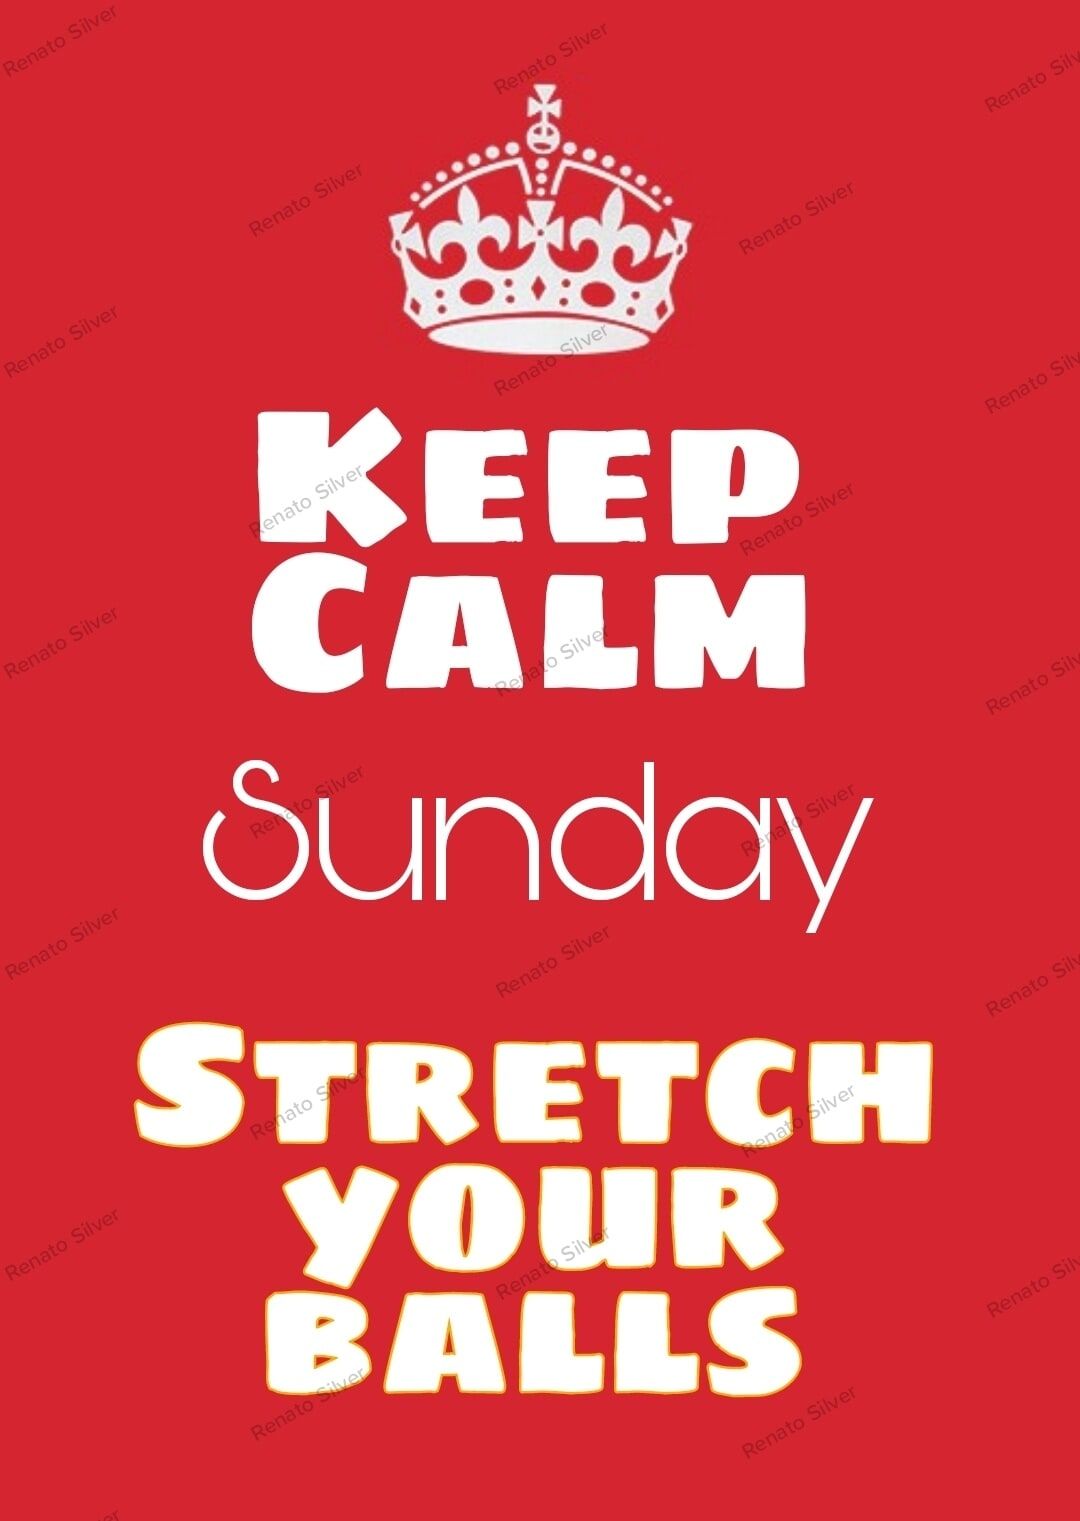 Keep calm and stretch your balls.